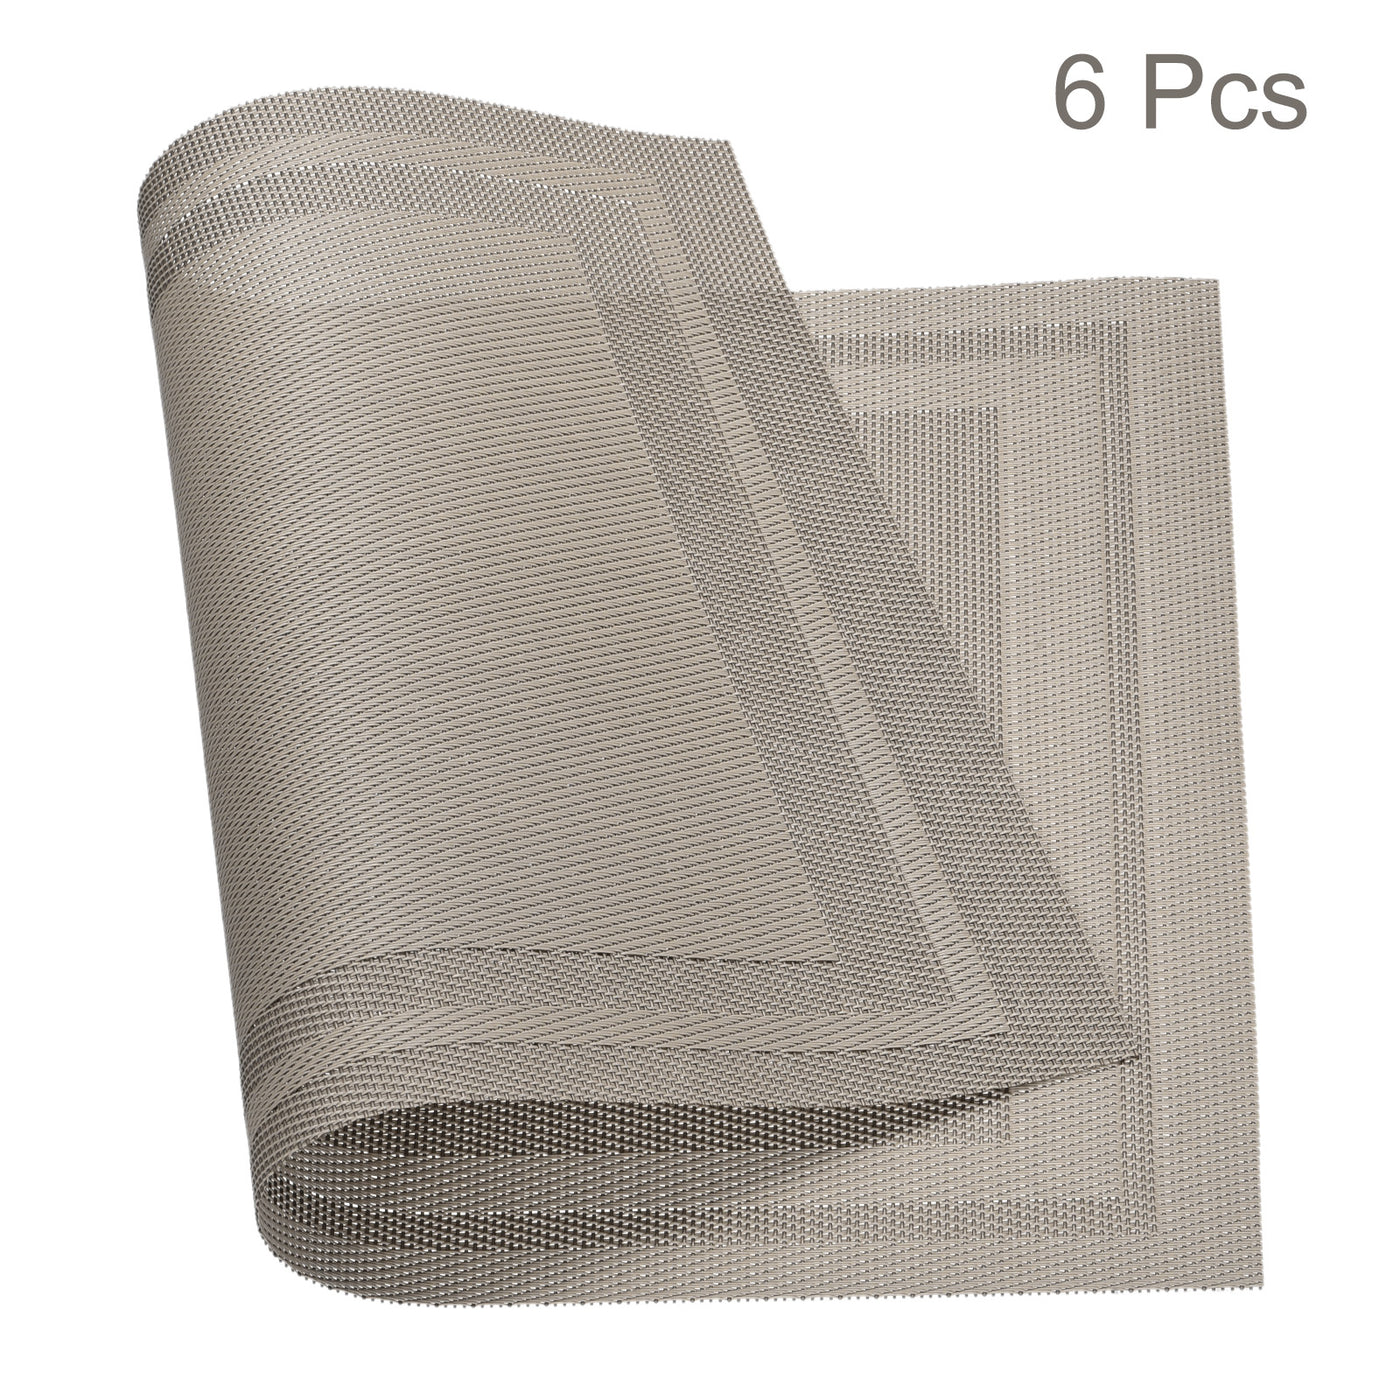 uxcell Uxcell Place Mats 450x300mm 6pcs PVC Table Washable Woven Placemat, Light Brown